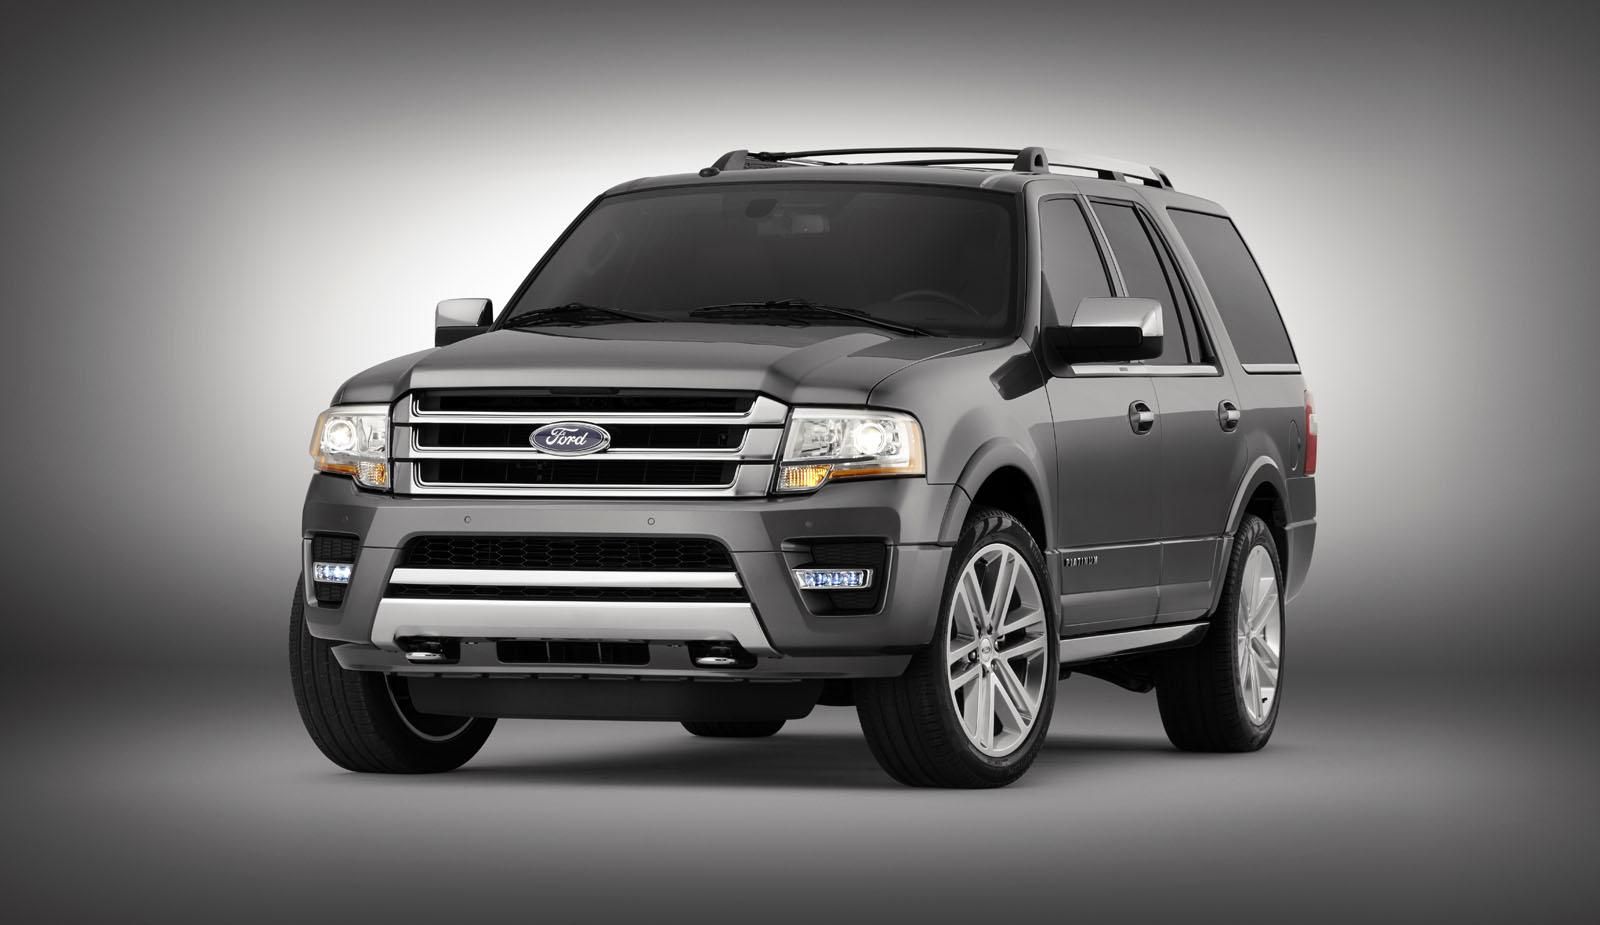 YEN 2015 FORD EXPEDTON RESM GALERS